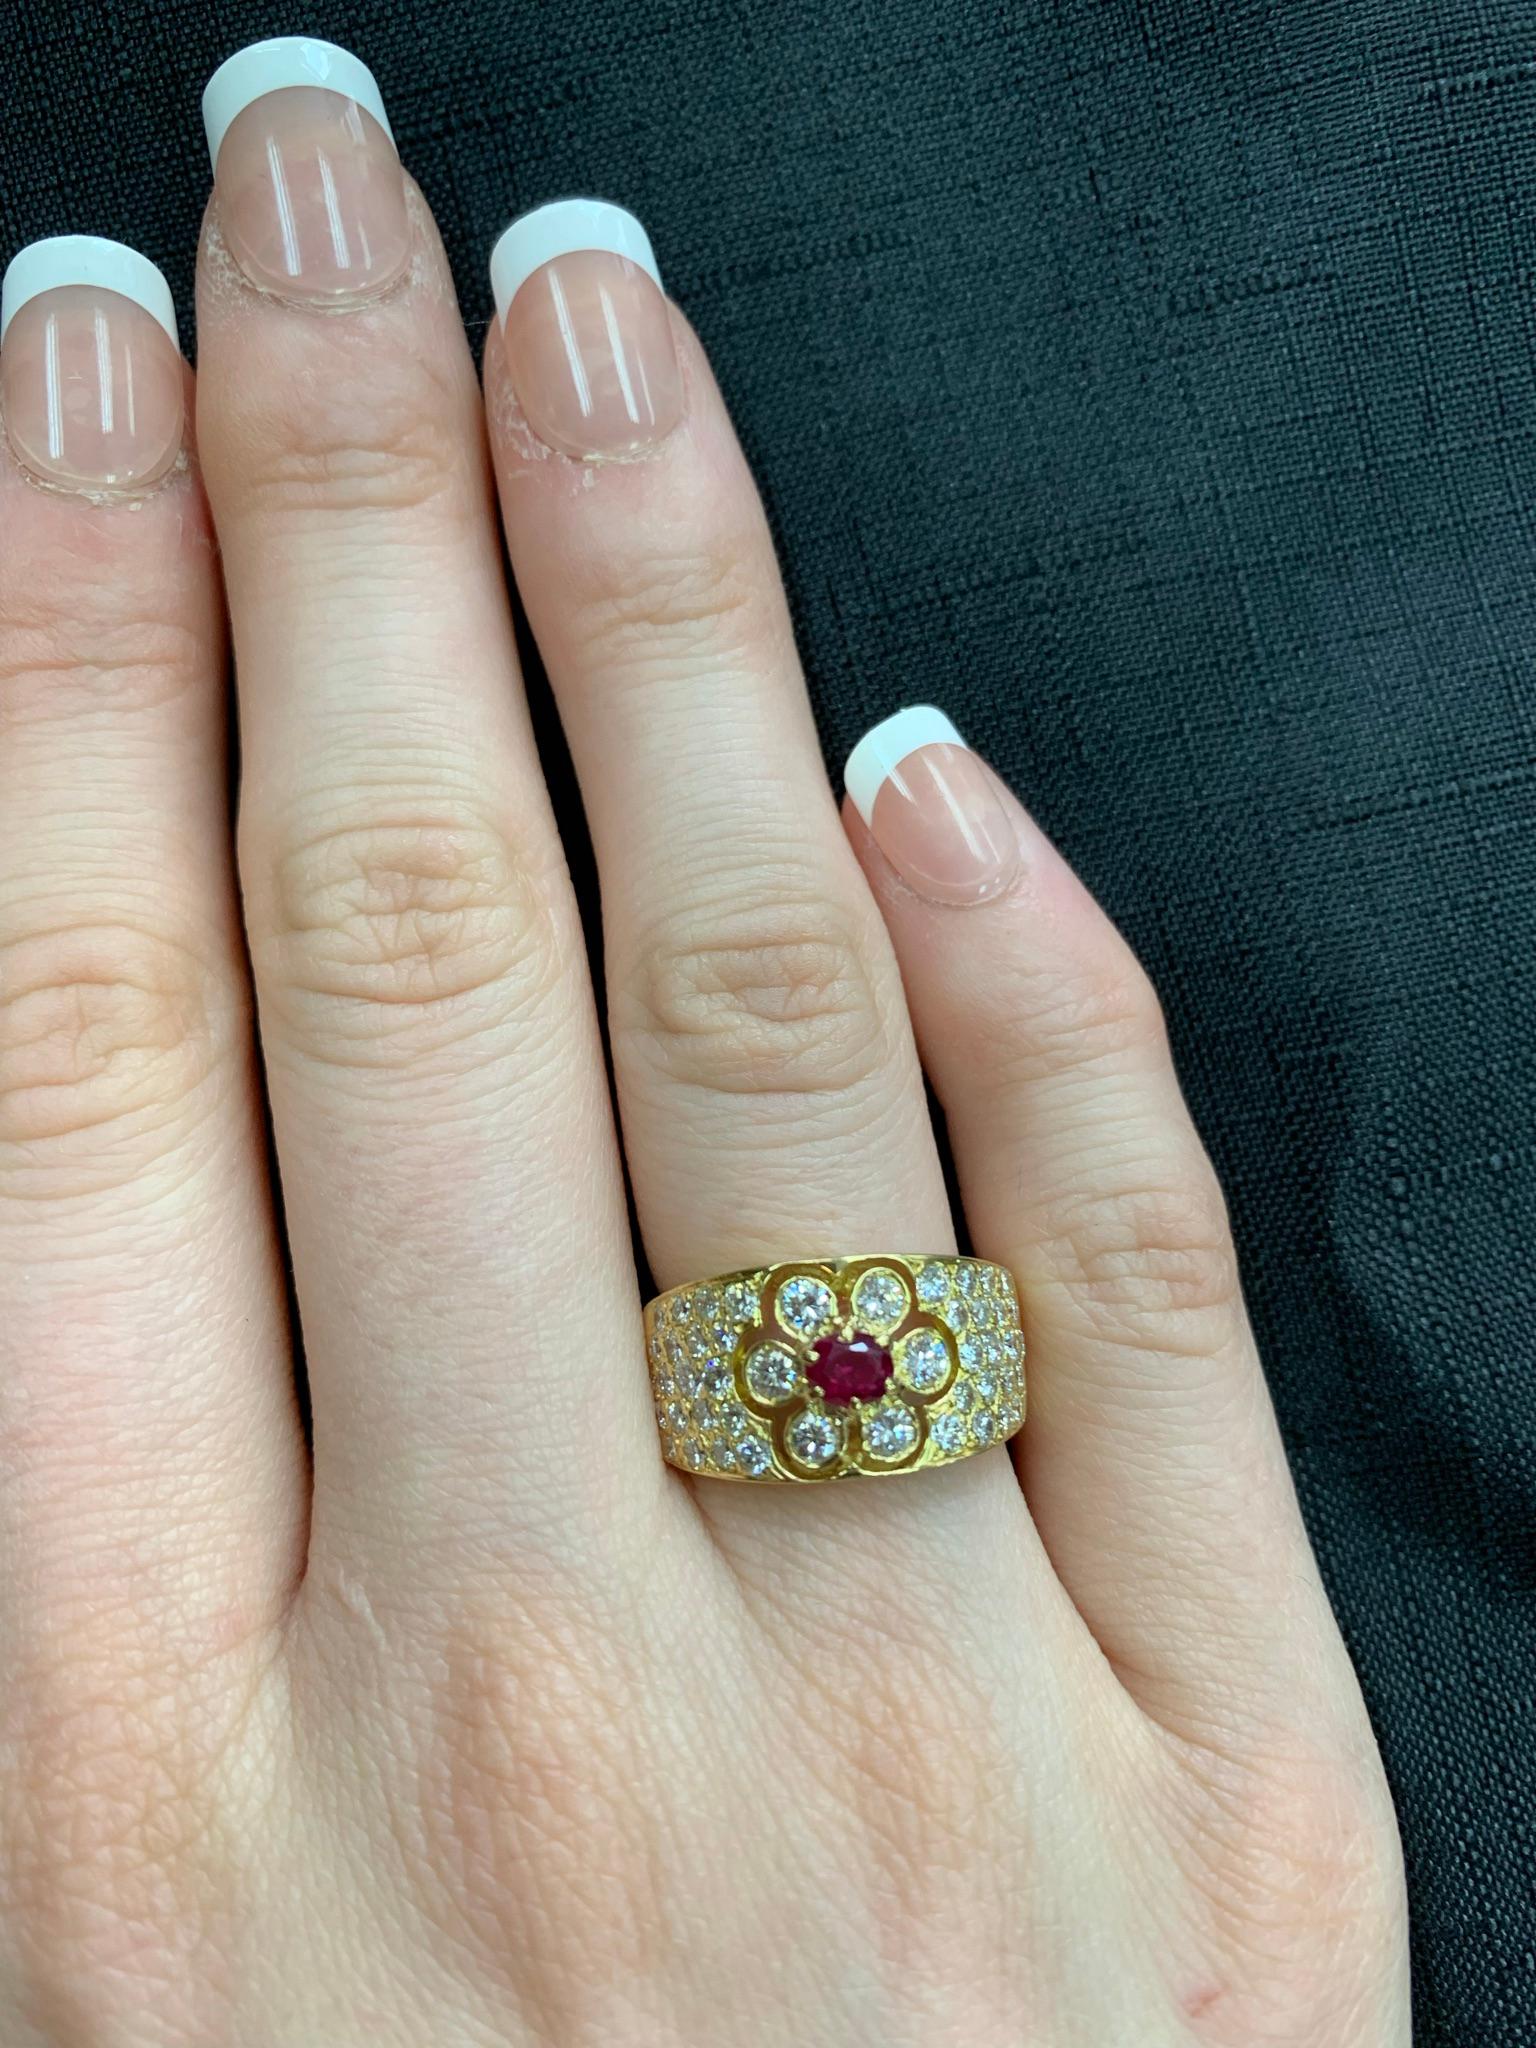 Van Cleef & Arpels Floral Ruby and Diamond Ring, 18 Karat, with Original VCA Box In Excellent Condition For Sale In New York, NY